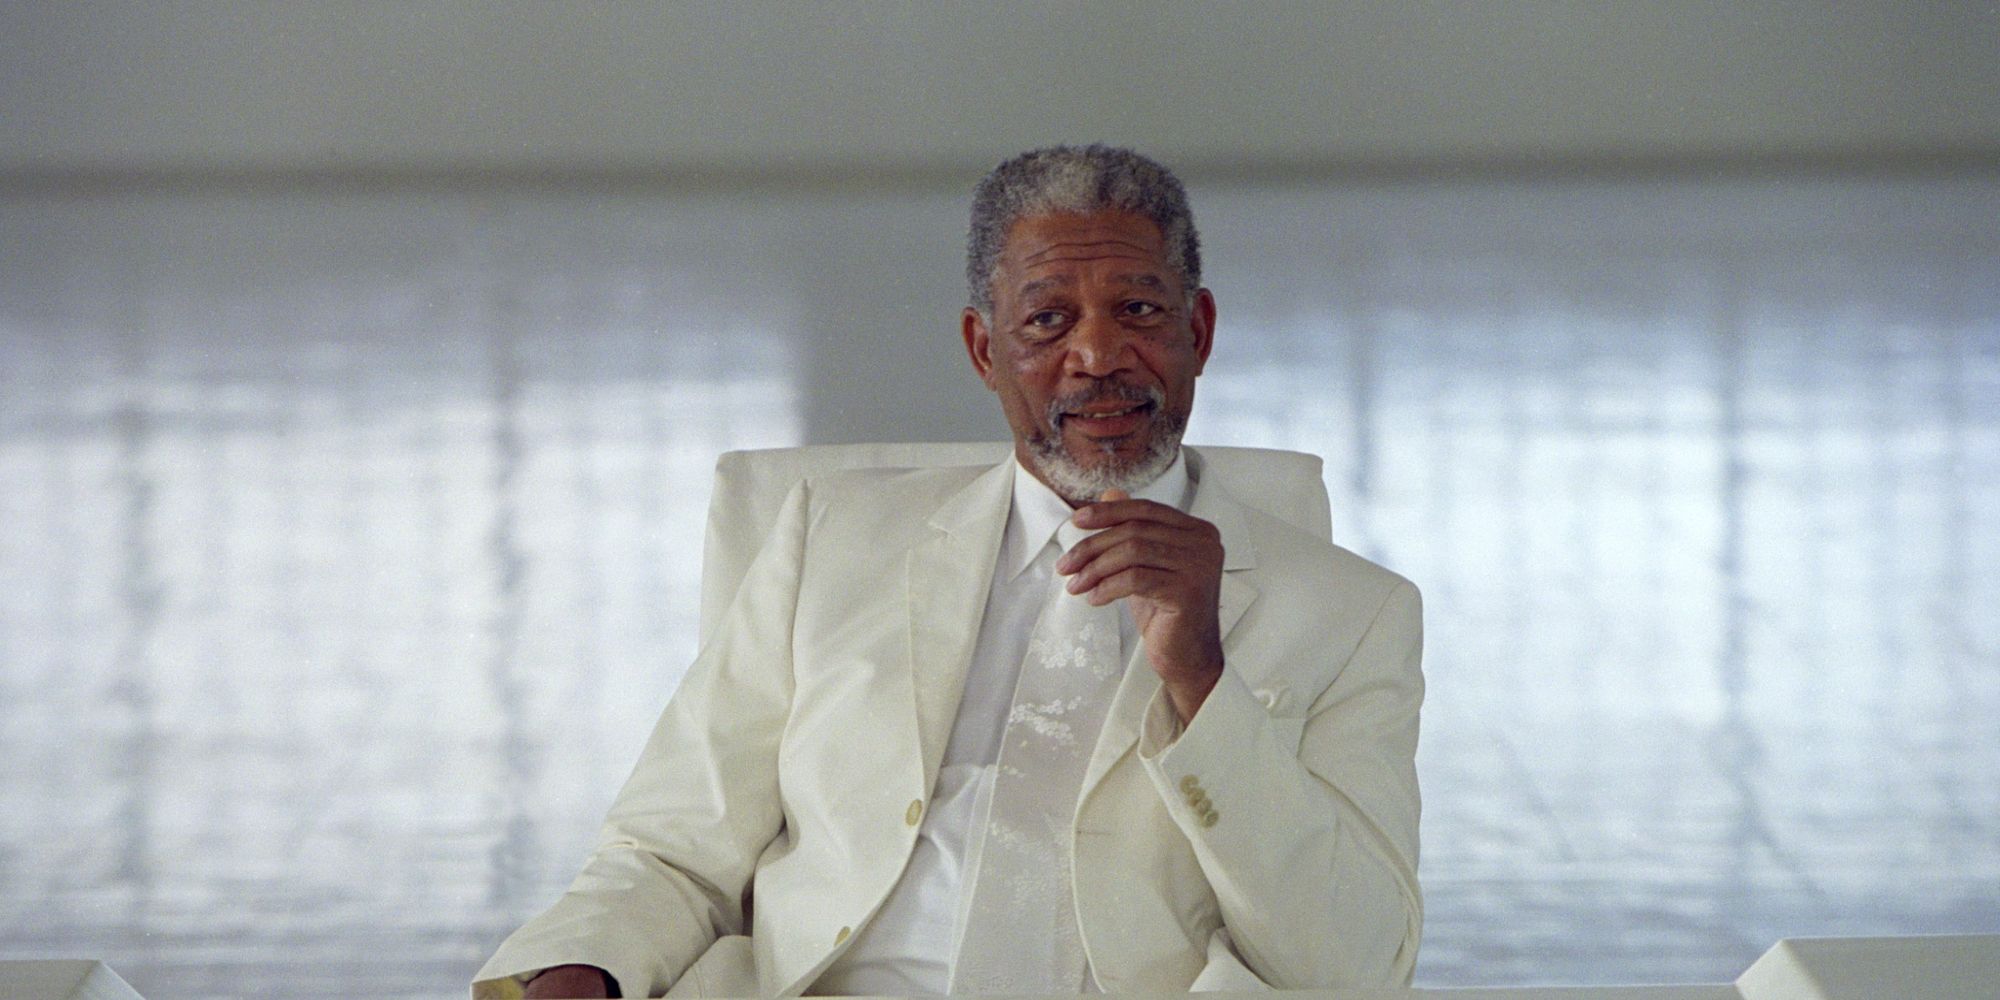 Morgan Freeman looks on as God from Bruce Almighty 